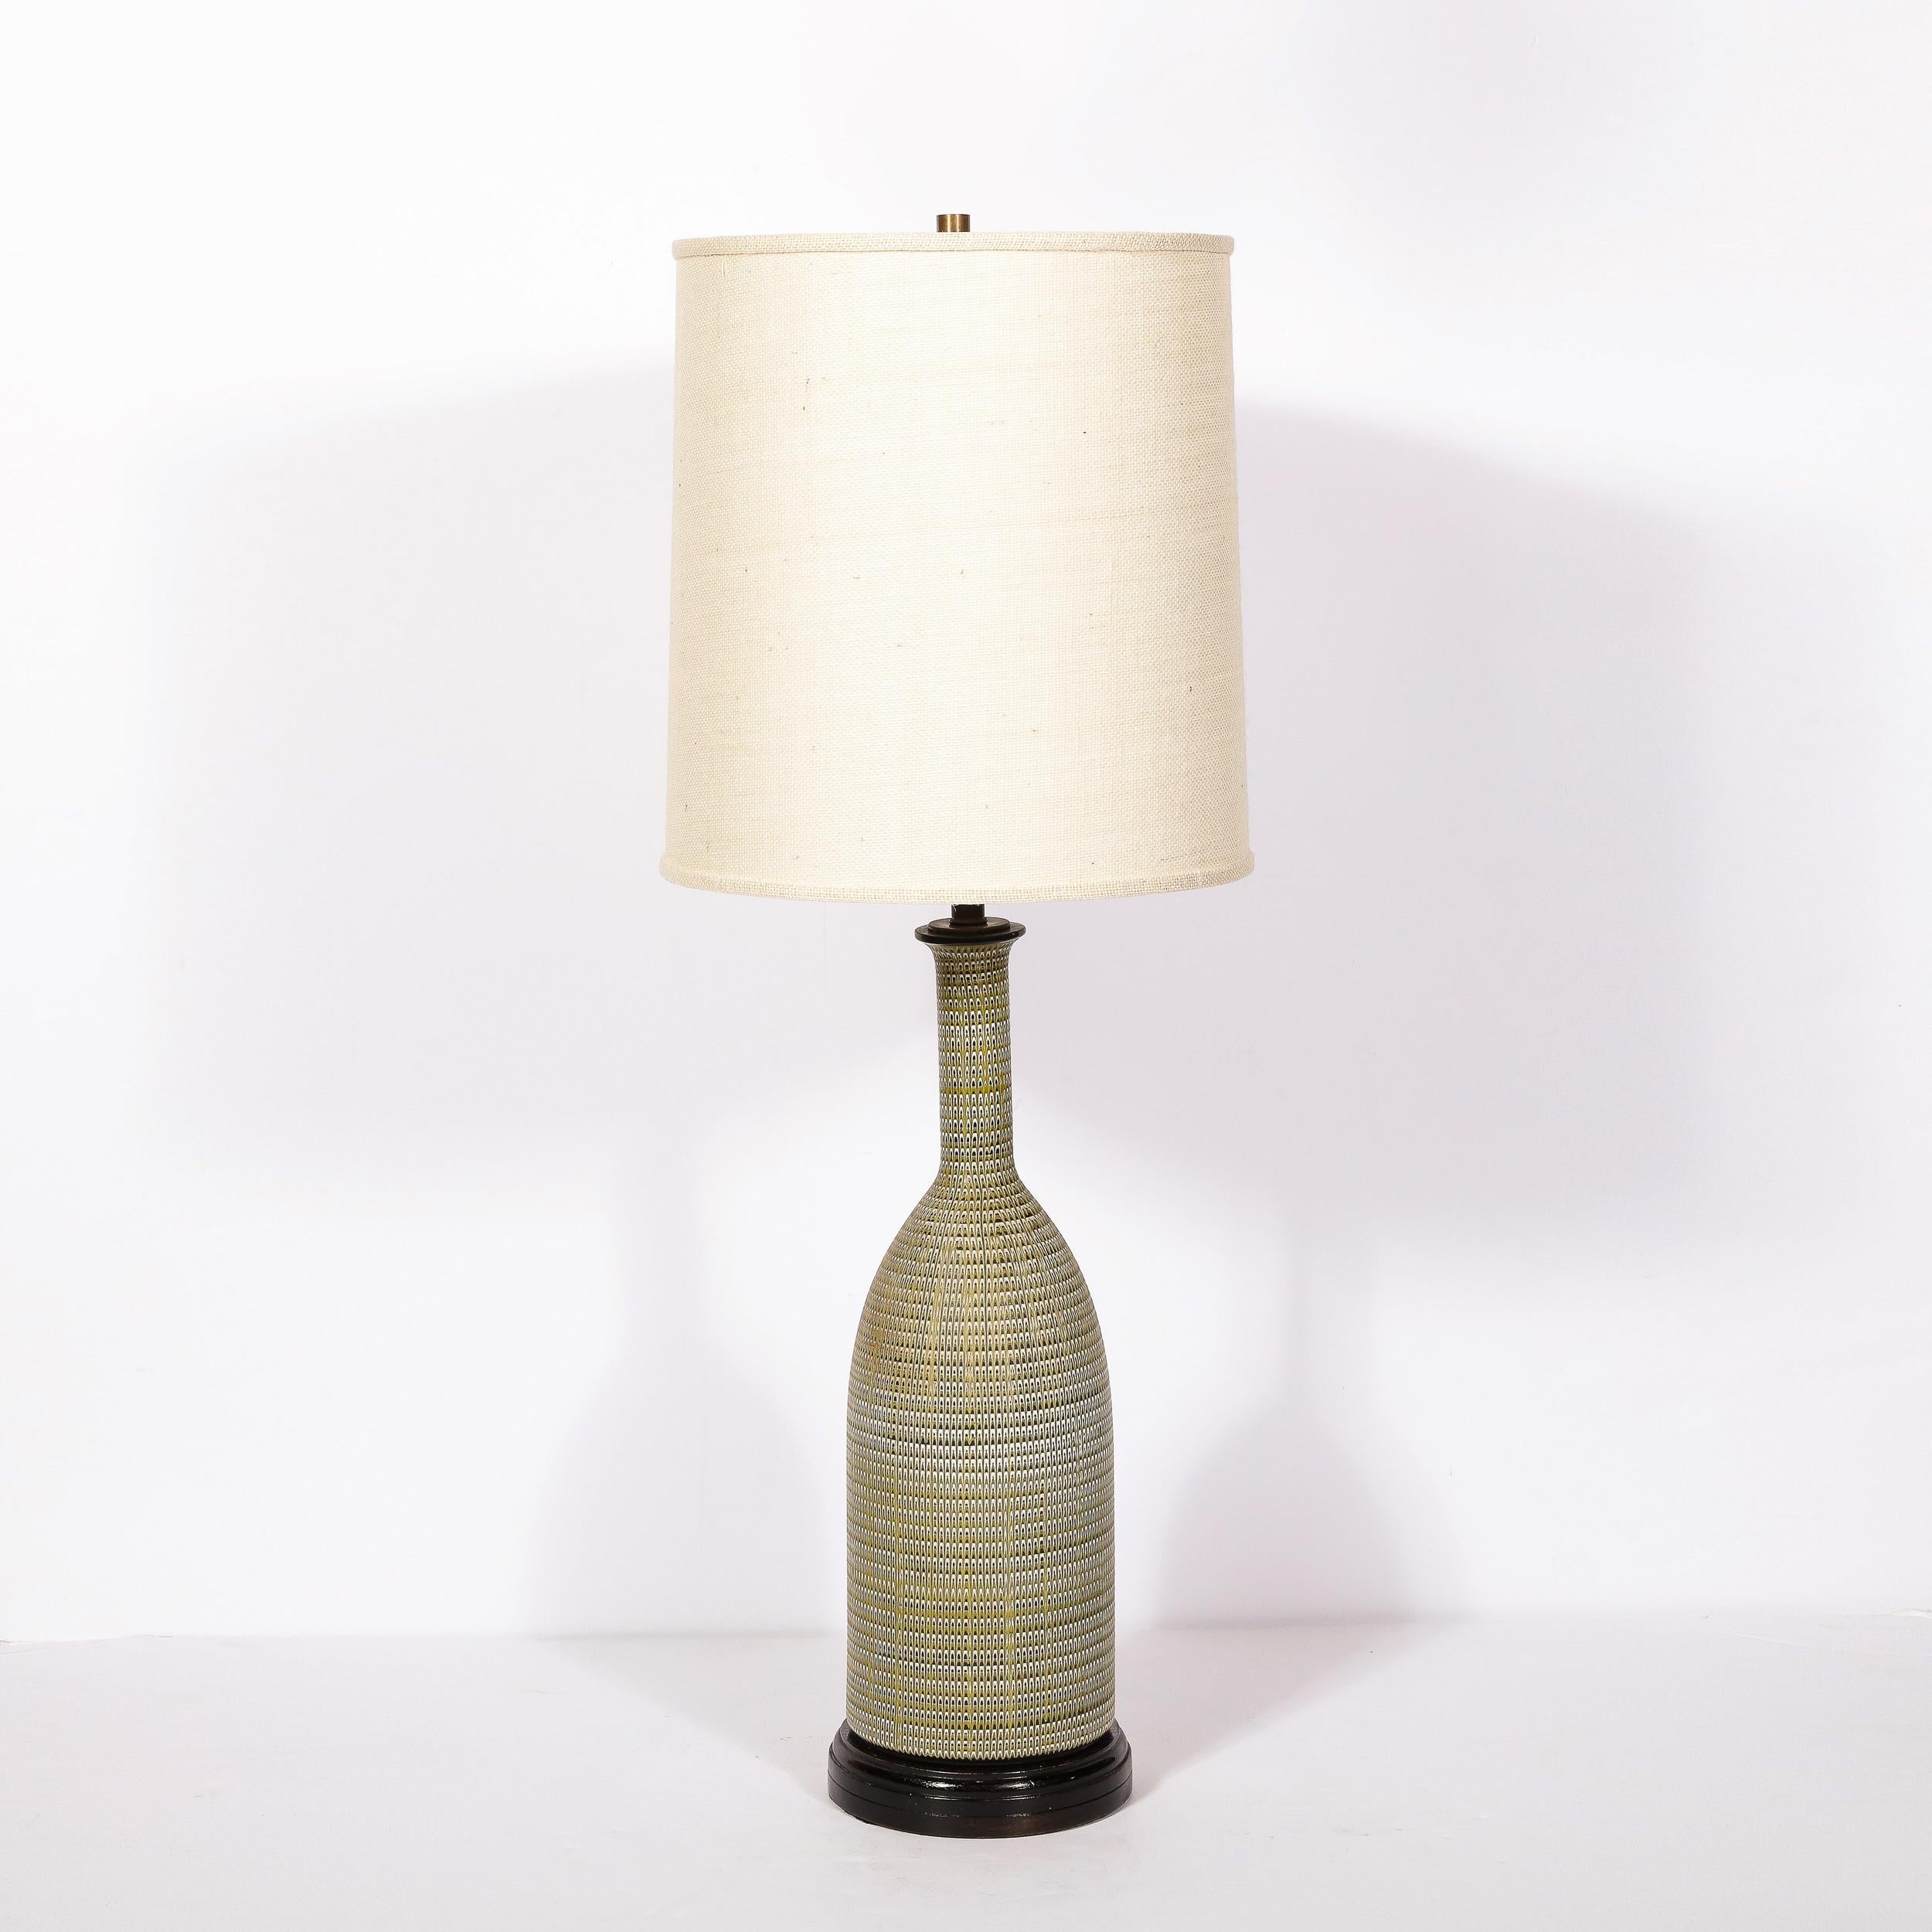 Pair of Mid-Century Modern Olive Green Glazed Ceramic Table Lamps 1